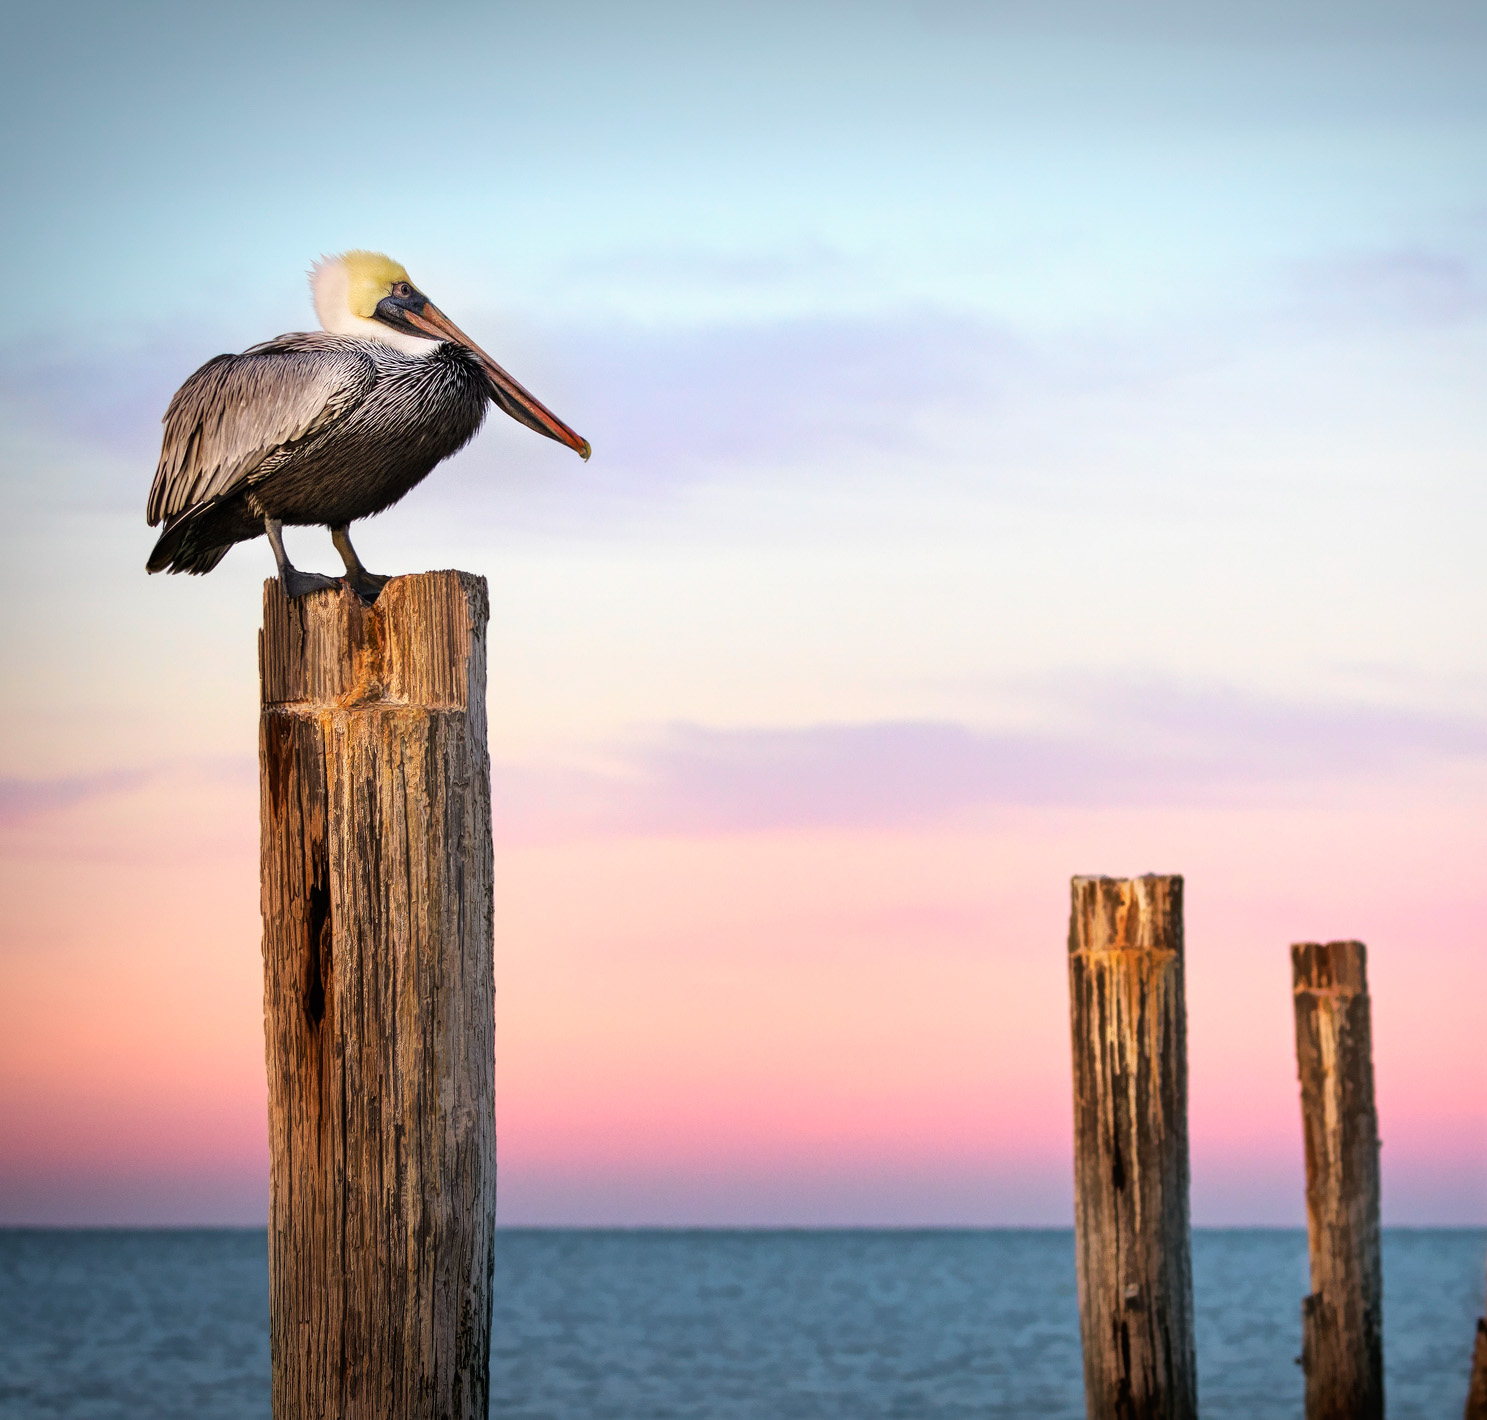 Sunrise scenic view with amazing colors against the water and wooden posts and a Pelican perched at Fort Myers Beach, Florida in winter.